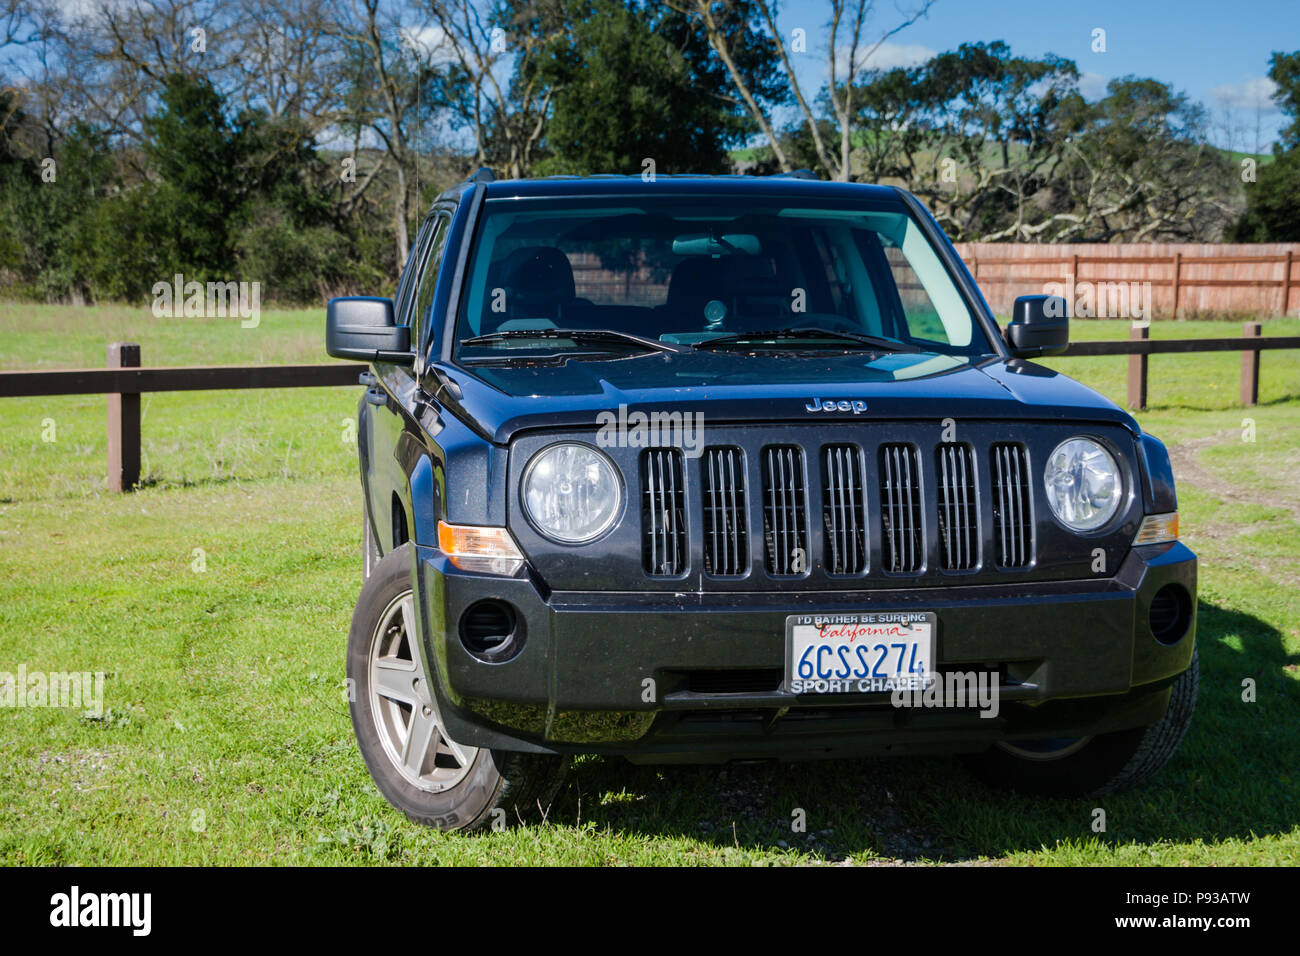 Black Jeep Patriot SUV (sport utility vehicle) in outdoor natural background with California license plate - front and side view Stock Photo